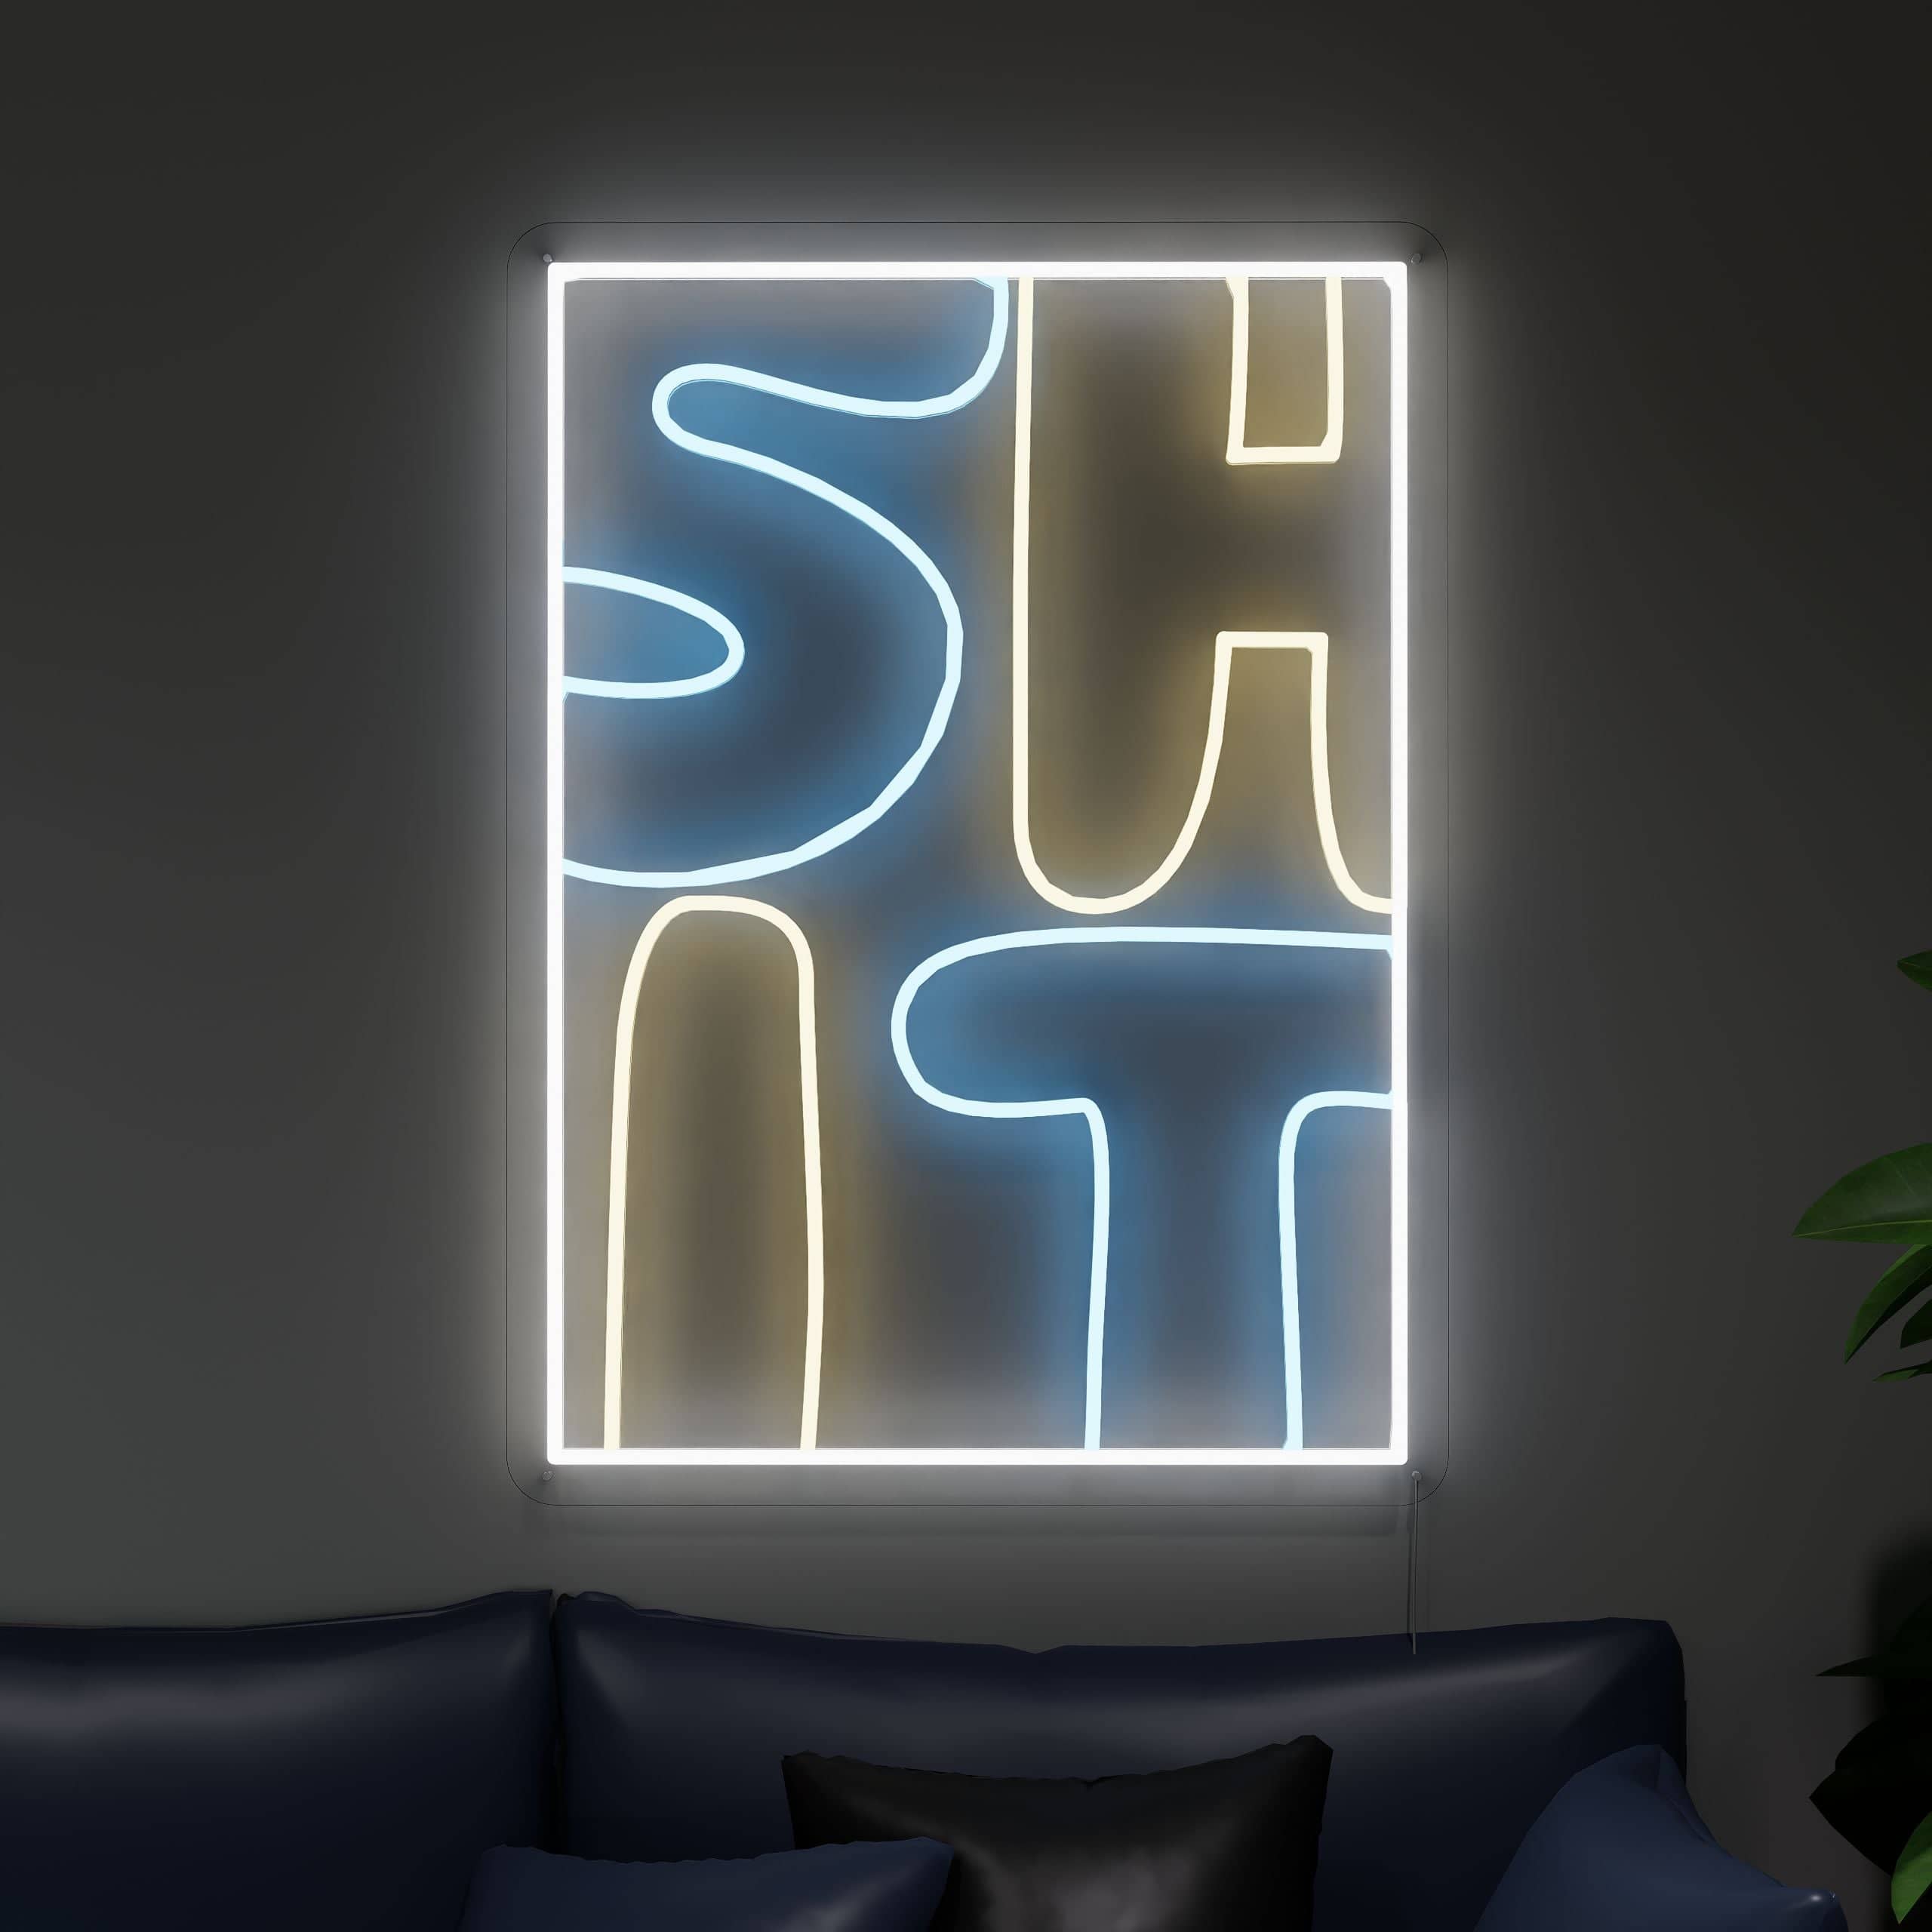 Neon sign brings bar style to gym spaces